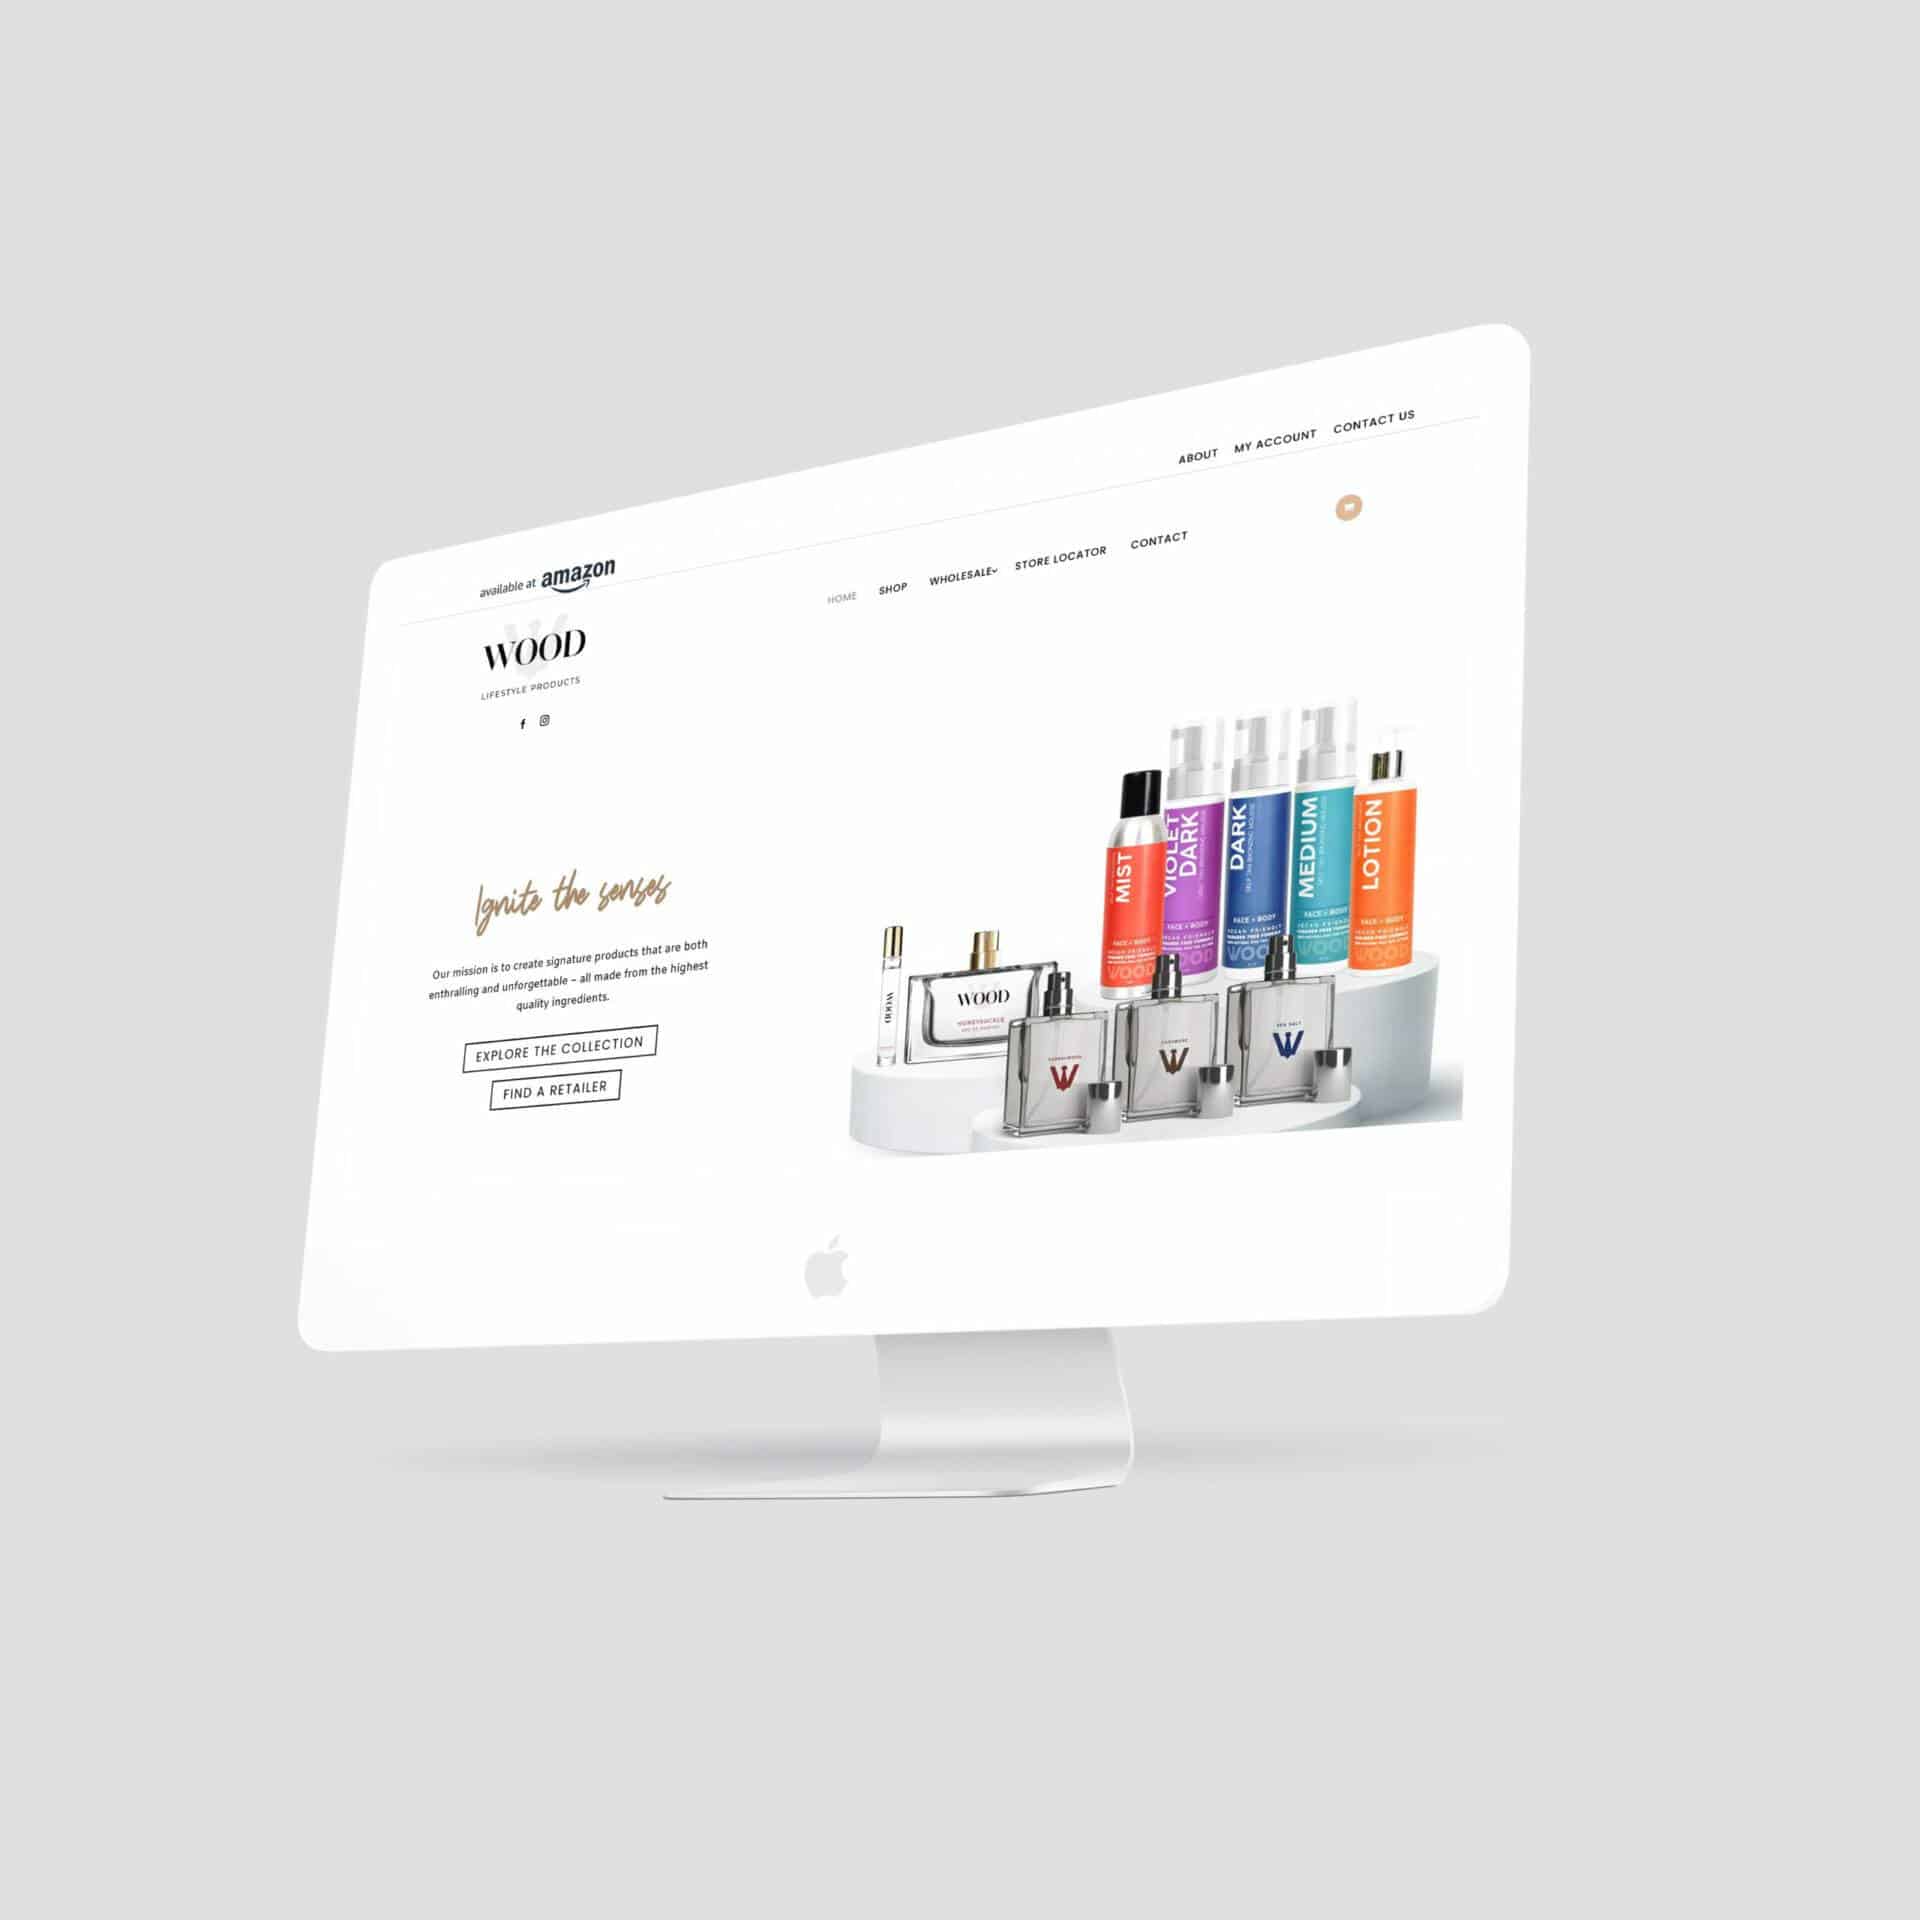 Website design for WOOD Lifestyle Products featuring colognes, perfumes, and tanners is shown.